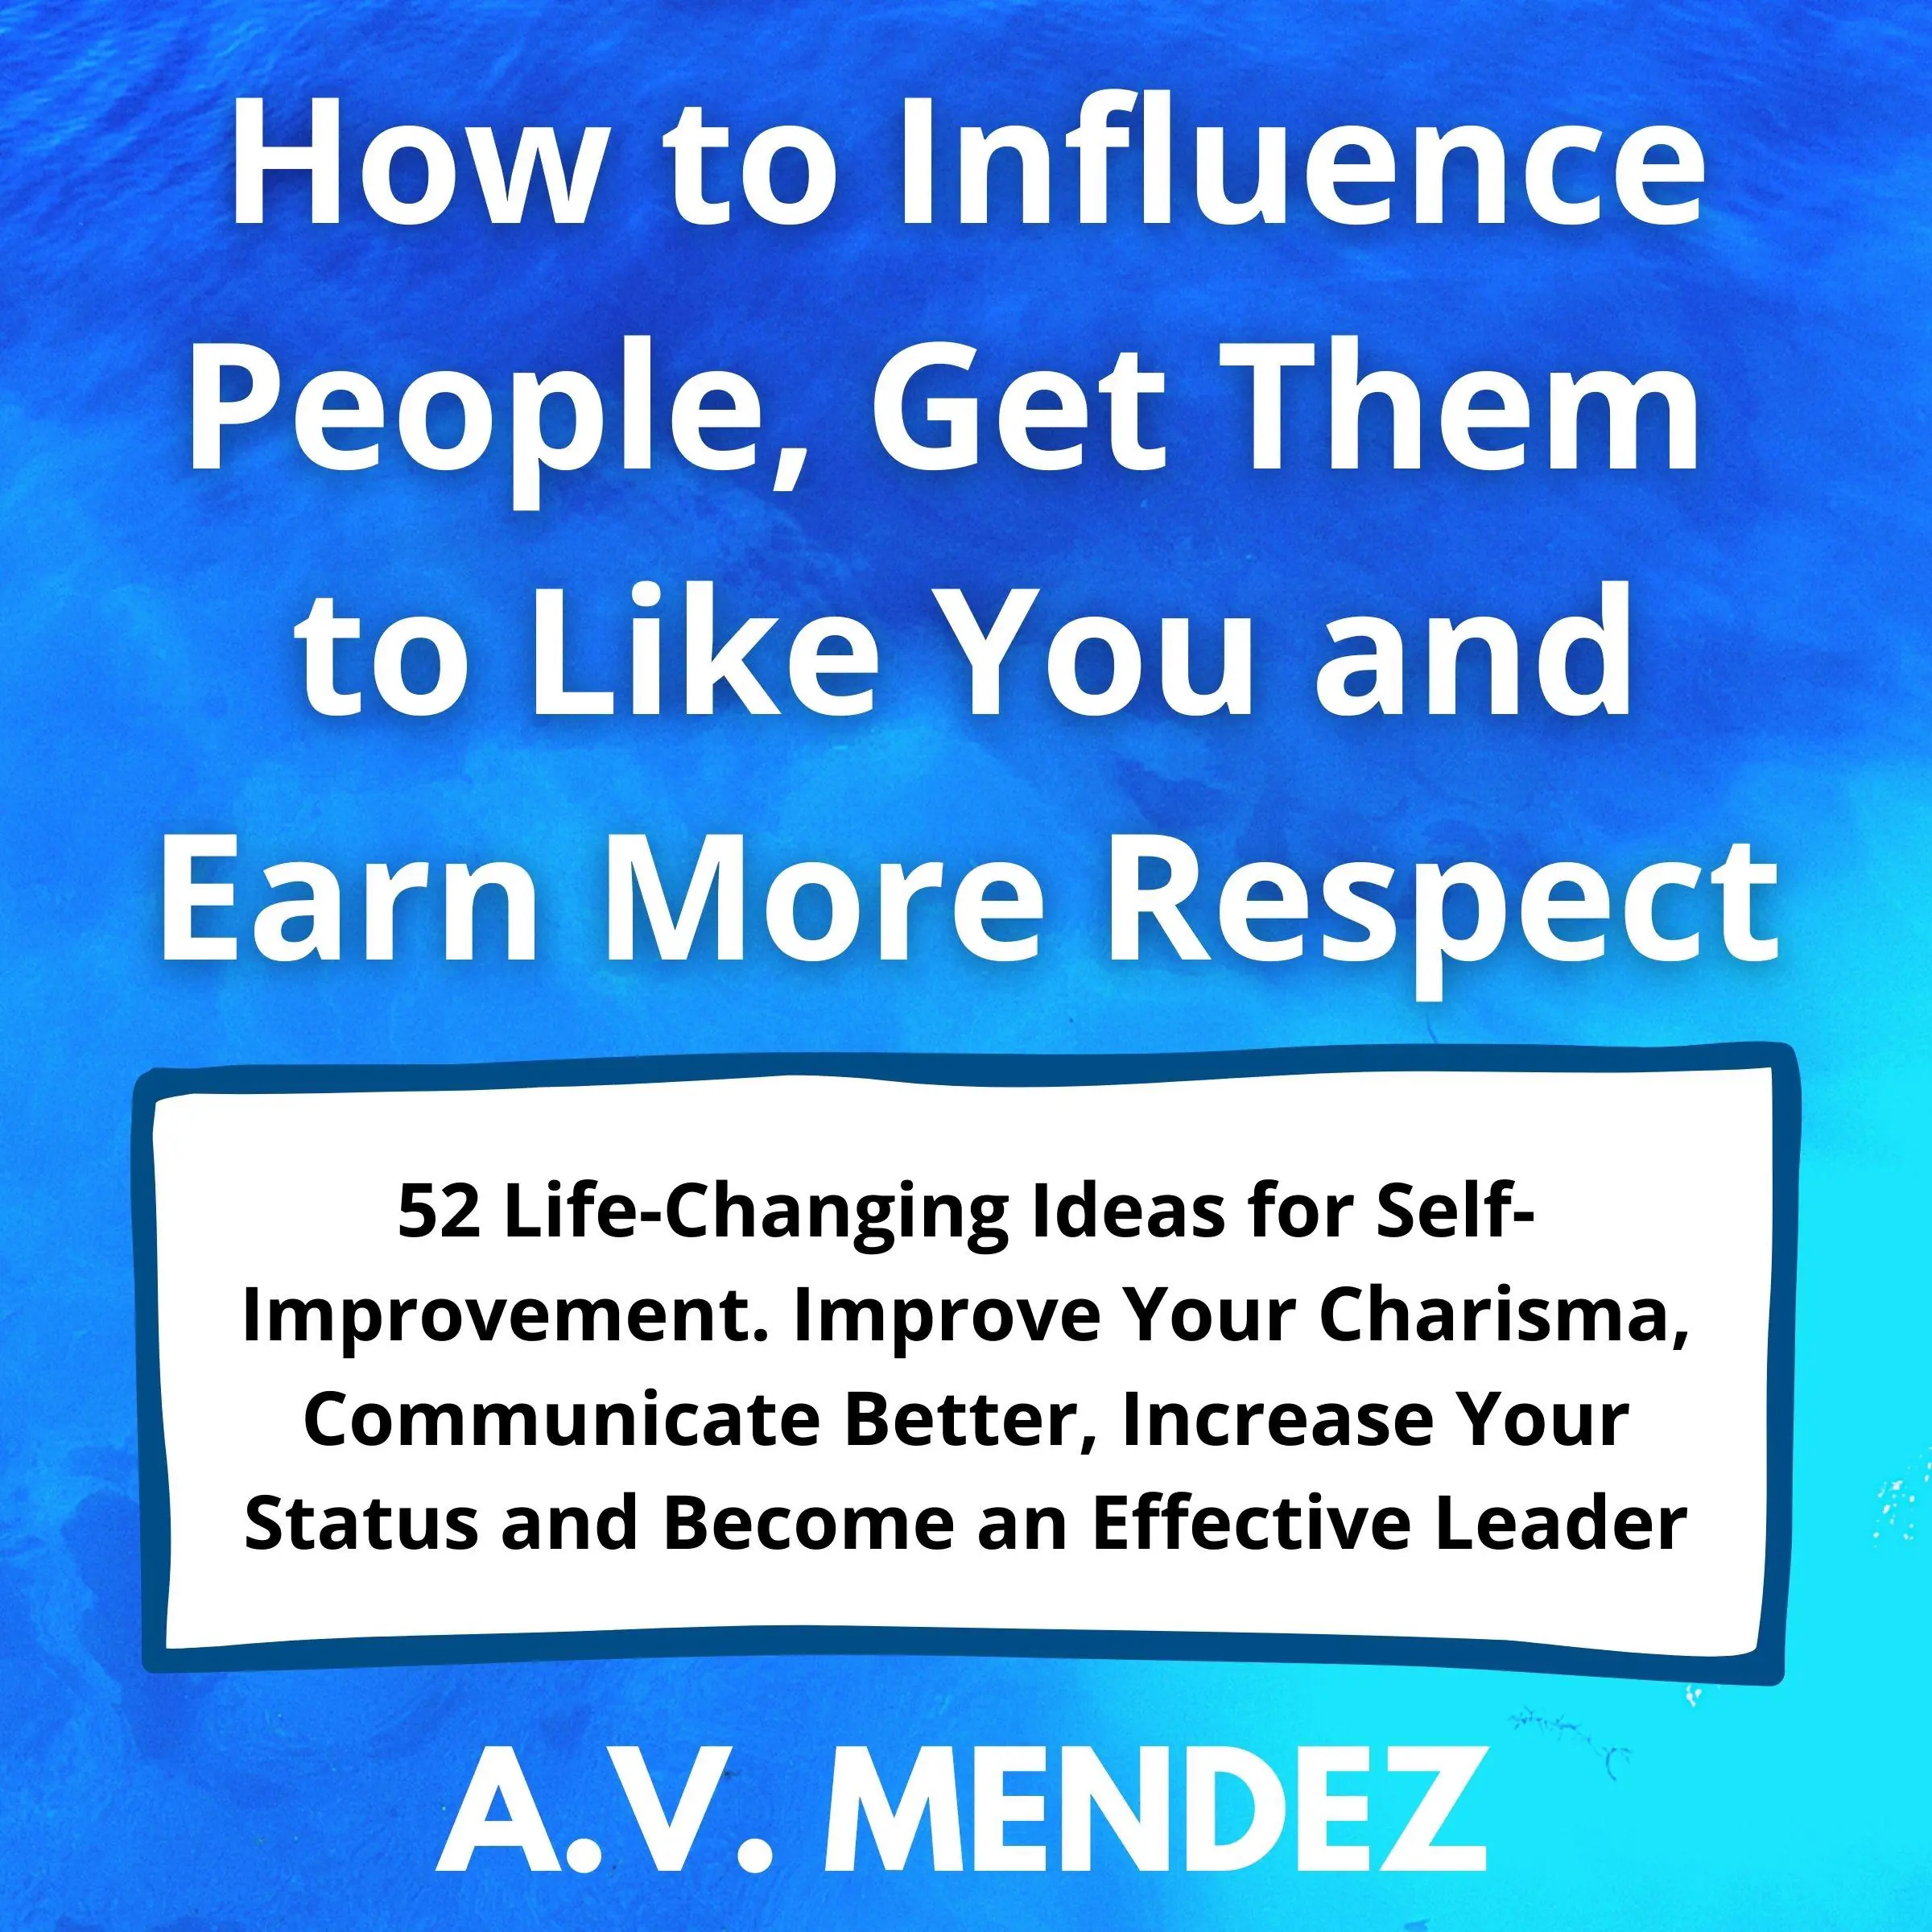 How to Influence People, Get Them to Like You and Earn More Respect: 52 Life-Changing Ideas for Self-Improvement.  Improve Your Charisma, Communicate Better, Increase Your Status and Become an Effective Leader Audiobook by A.V. Mendez